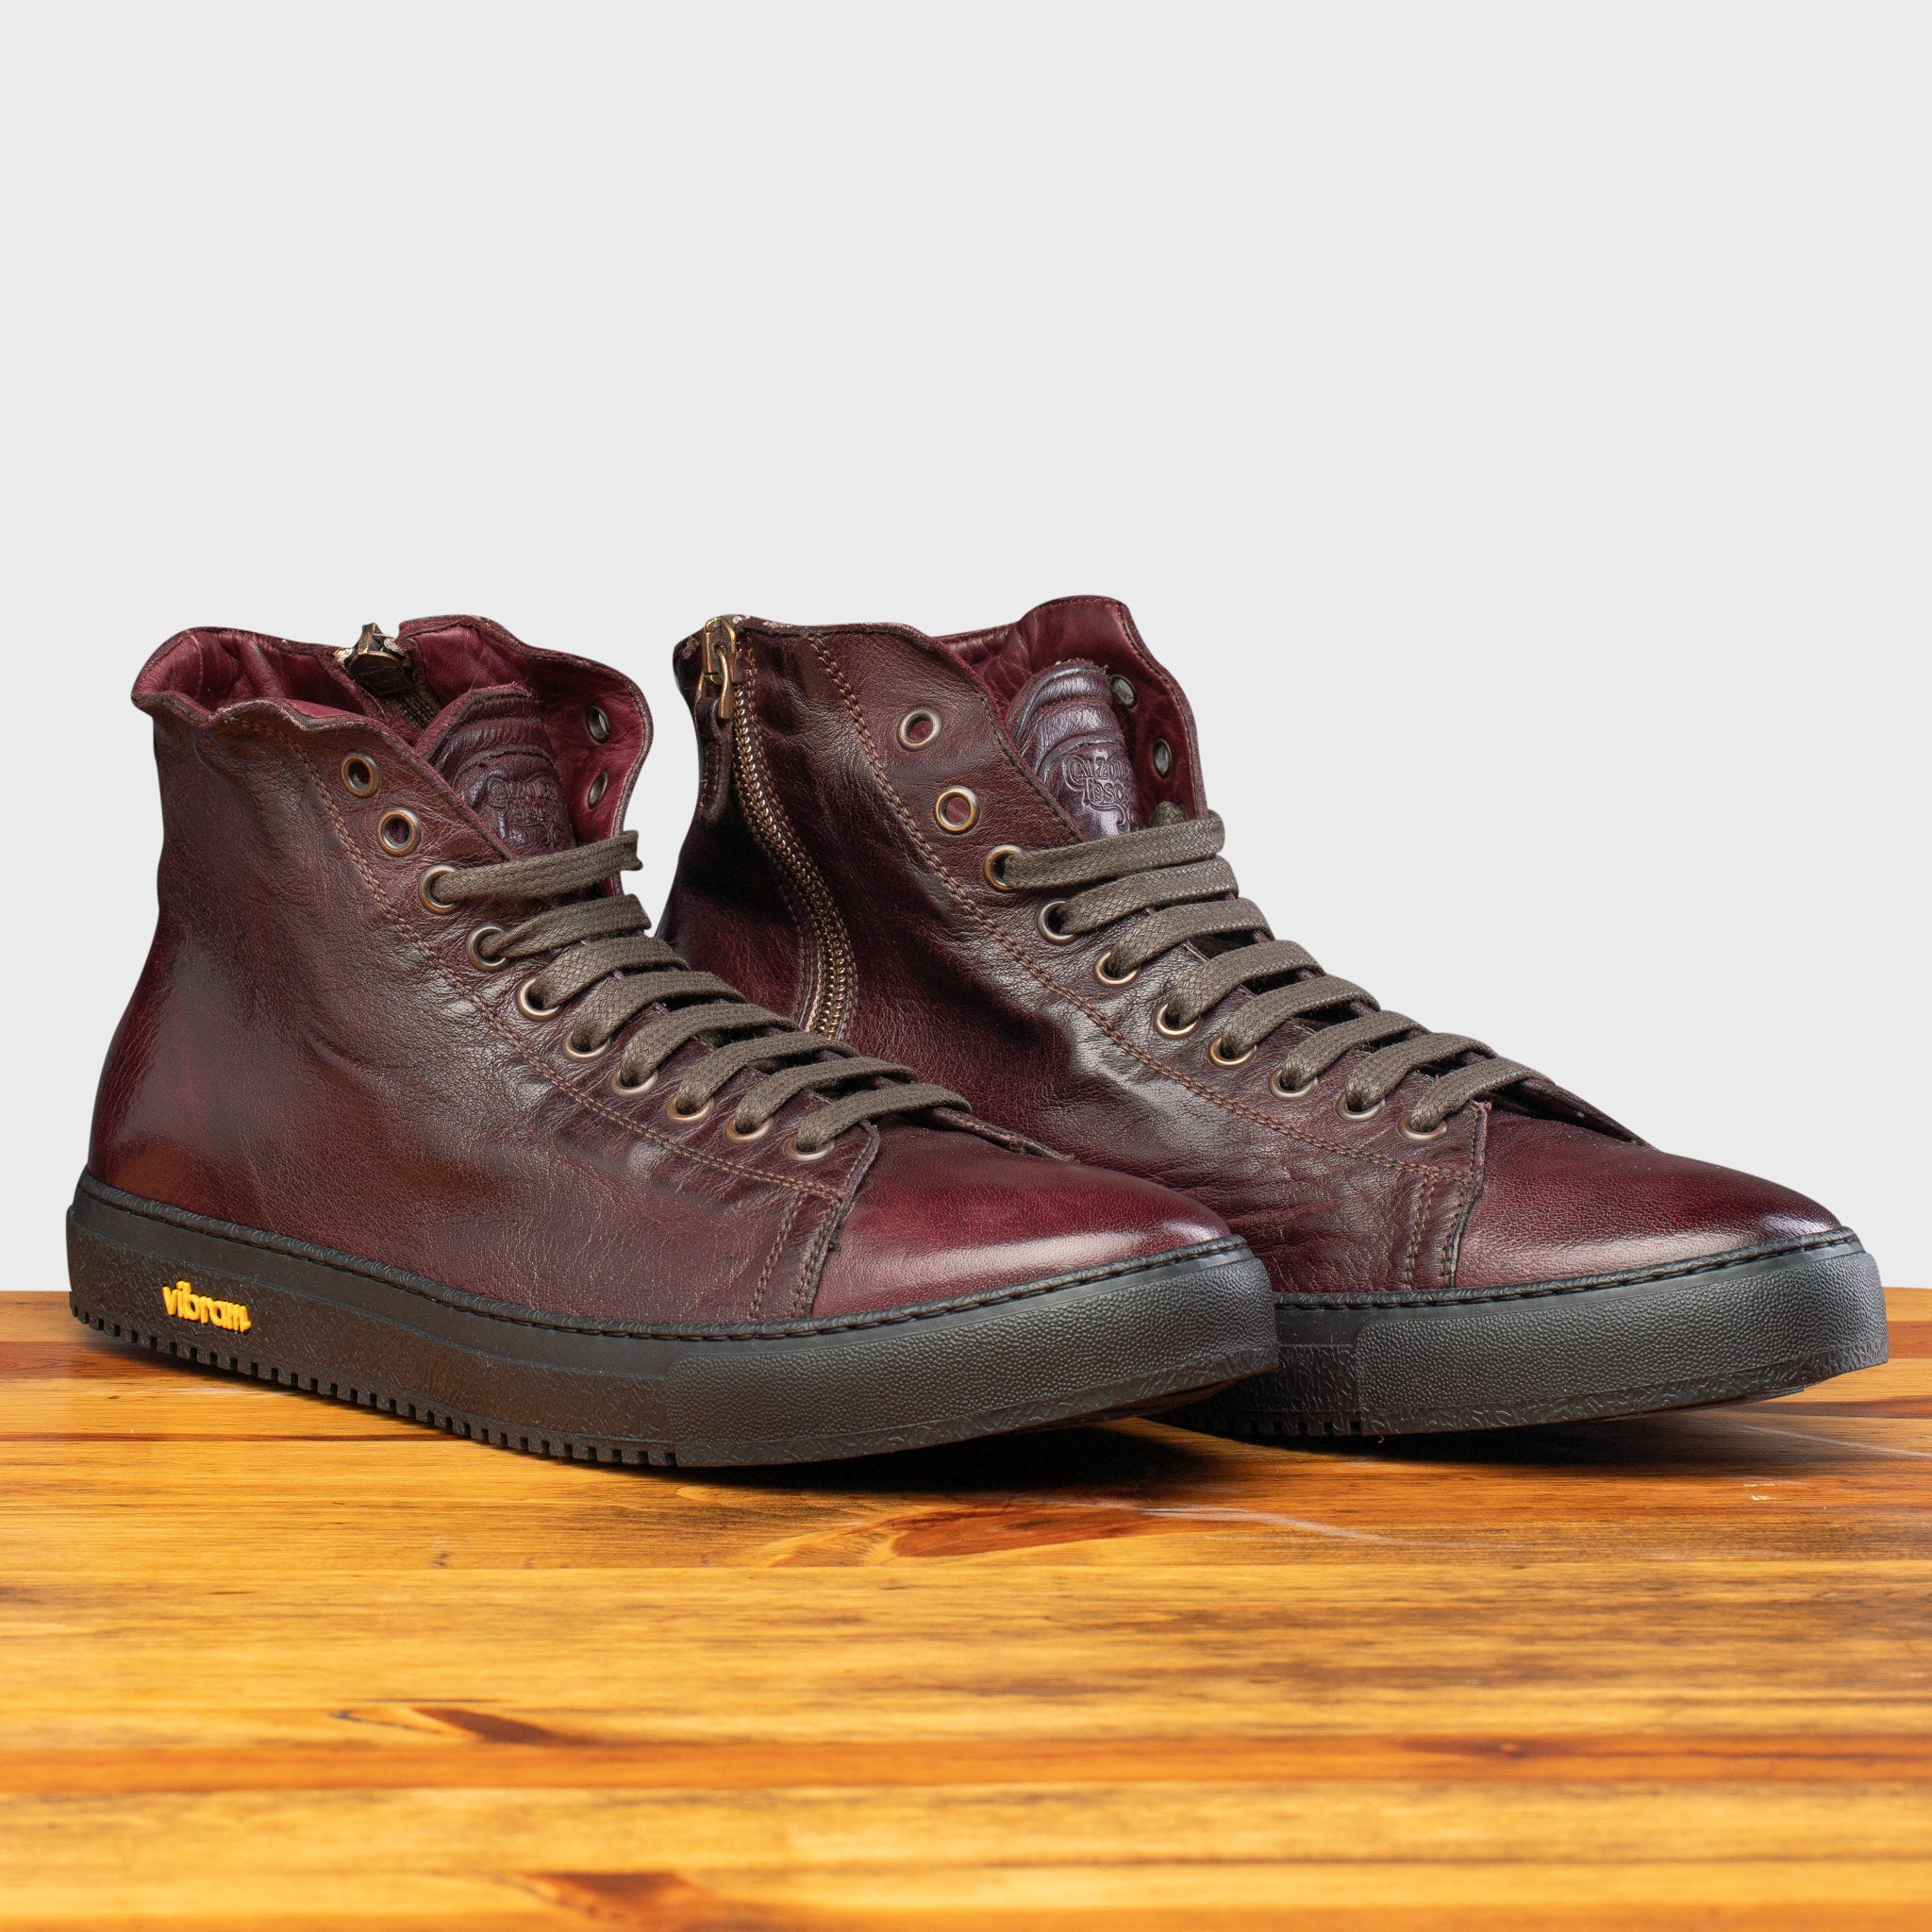 Side profile of H883 Calzoleria Toscana Liver High Top Benso Sneaker on top of a wooden table